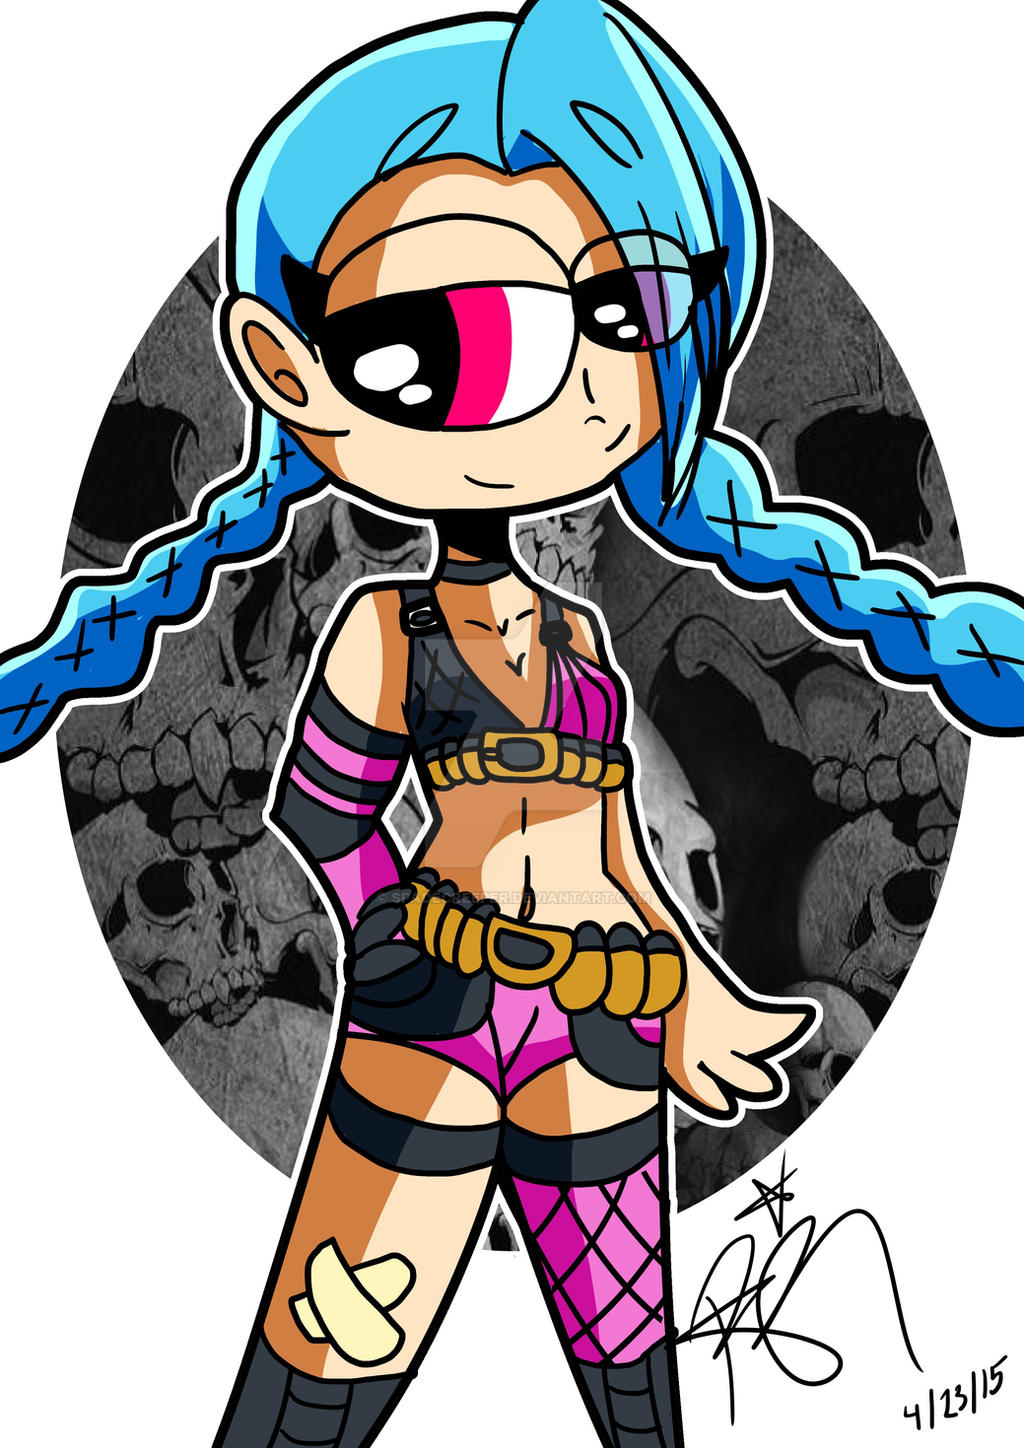 Jinx Come On Shoot Faster Come on shoot faster (Jinx) by spadecreeper on DeviantArt